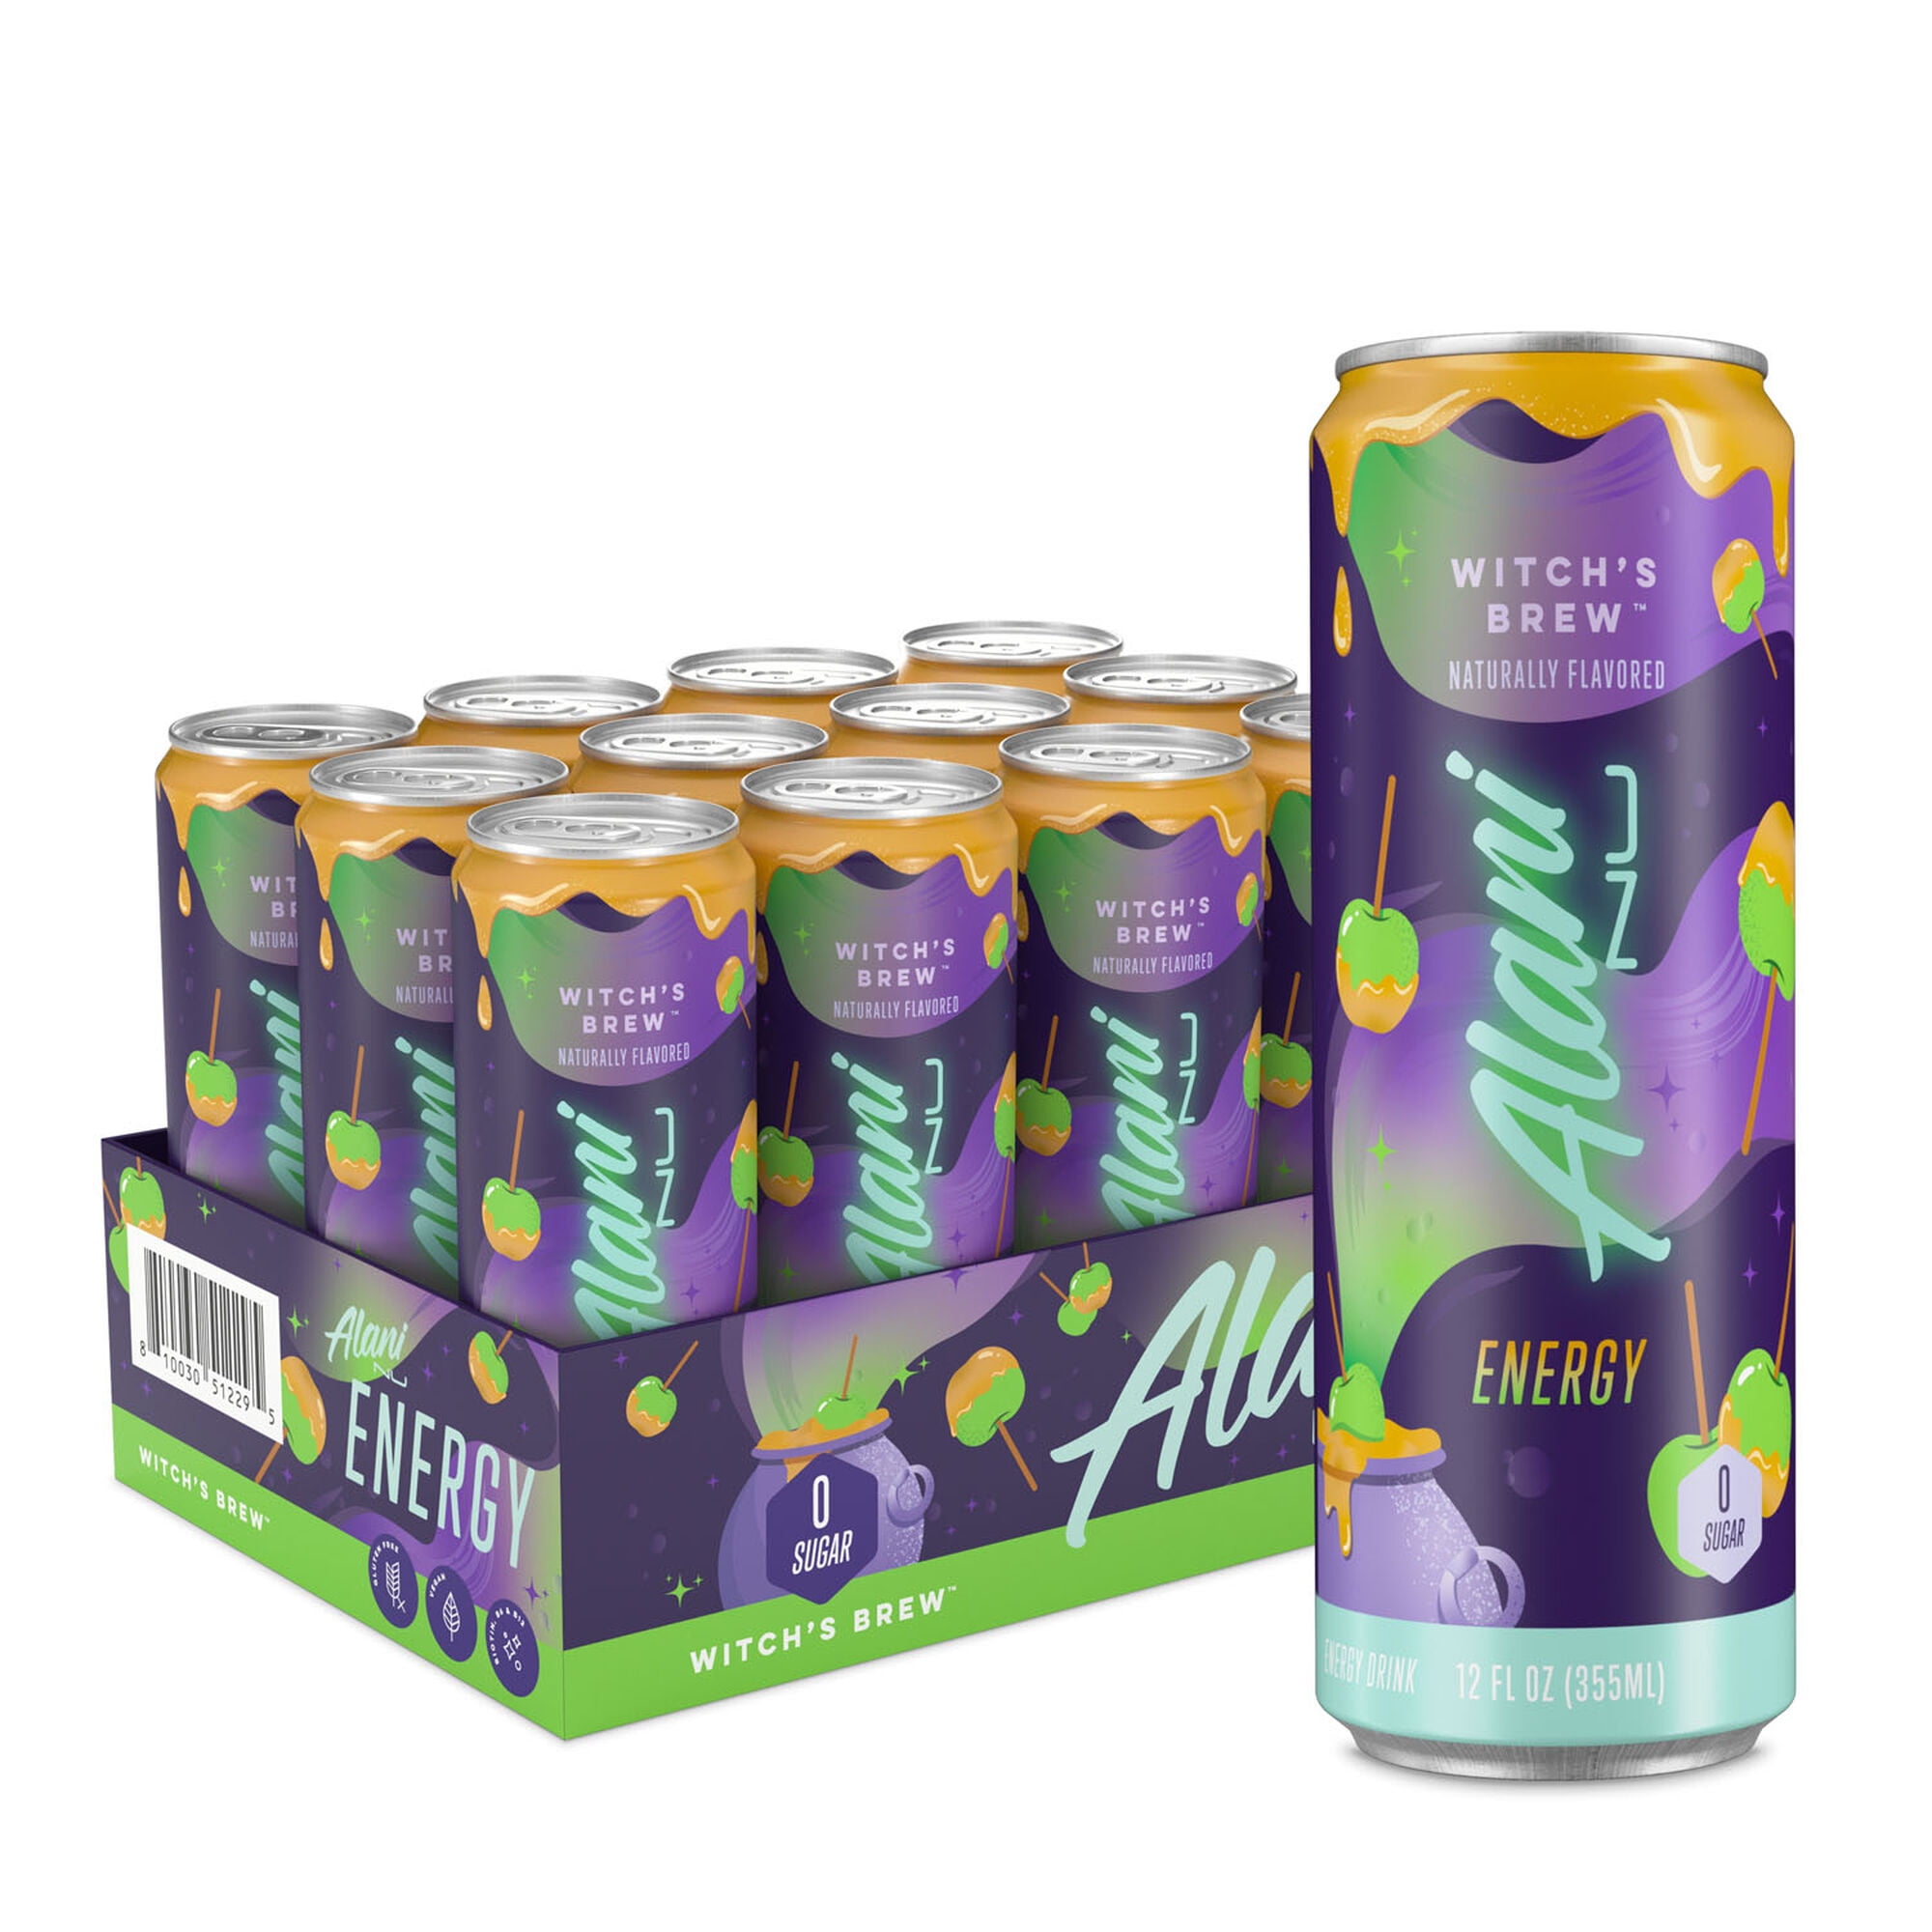 Alani Nu Energy Drink, Pre-Workout Performance, Witch's Brew, 12 oz Cans (Pack of 12) (Limited Edition) - Walmart.com